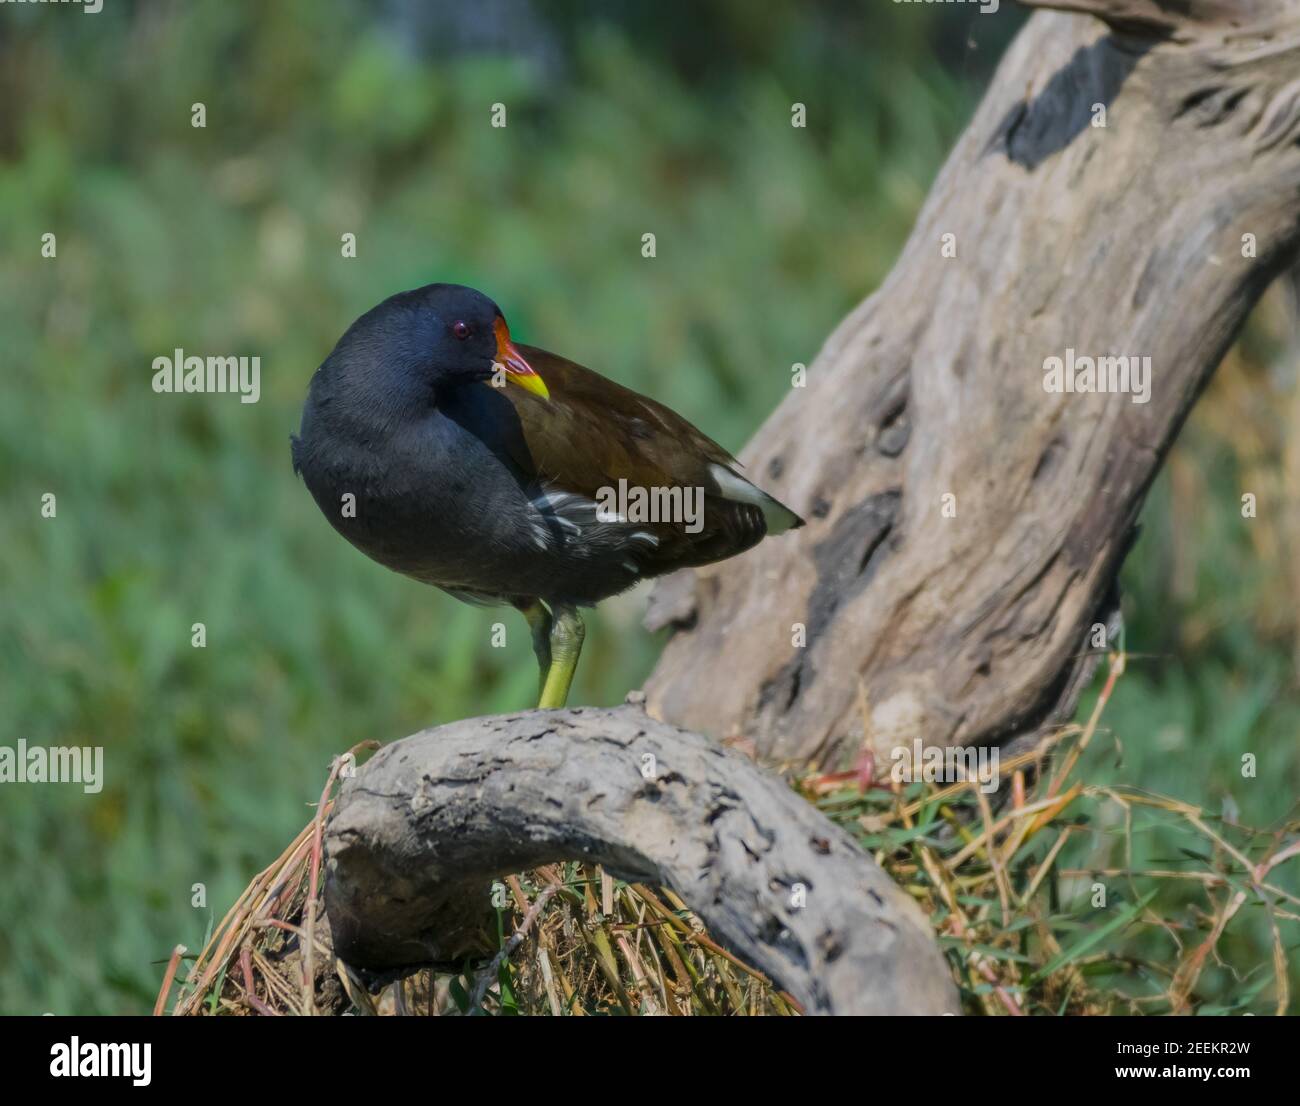 Moorhens or marsh hens sitting on a tree branch Stock Photo